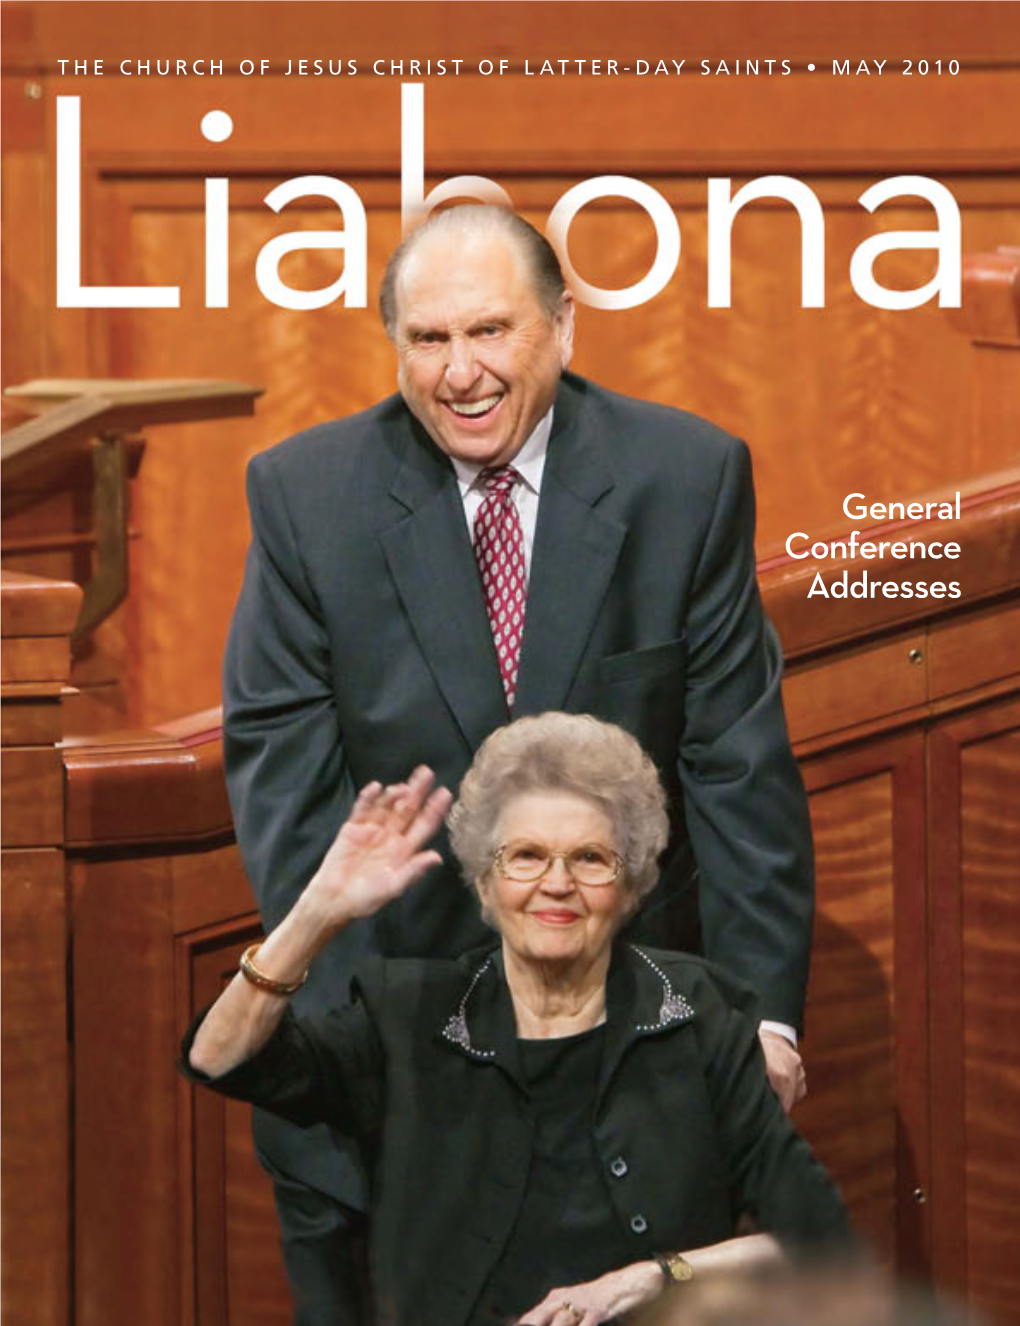 LIAHONA 09285 Official International Magazine of the Church of Jesus Christ of Latter-Day Saints the First Presidency: Thomas S